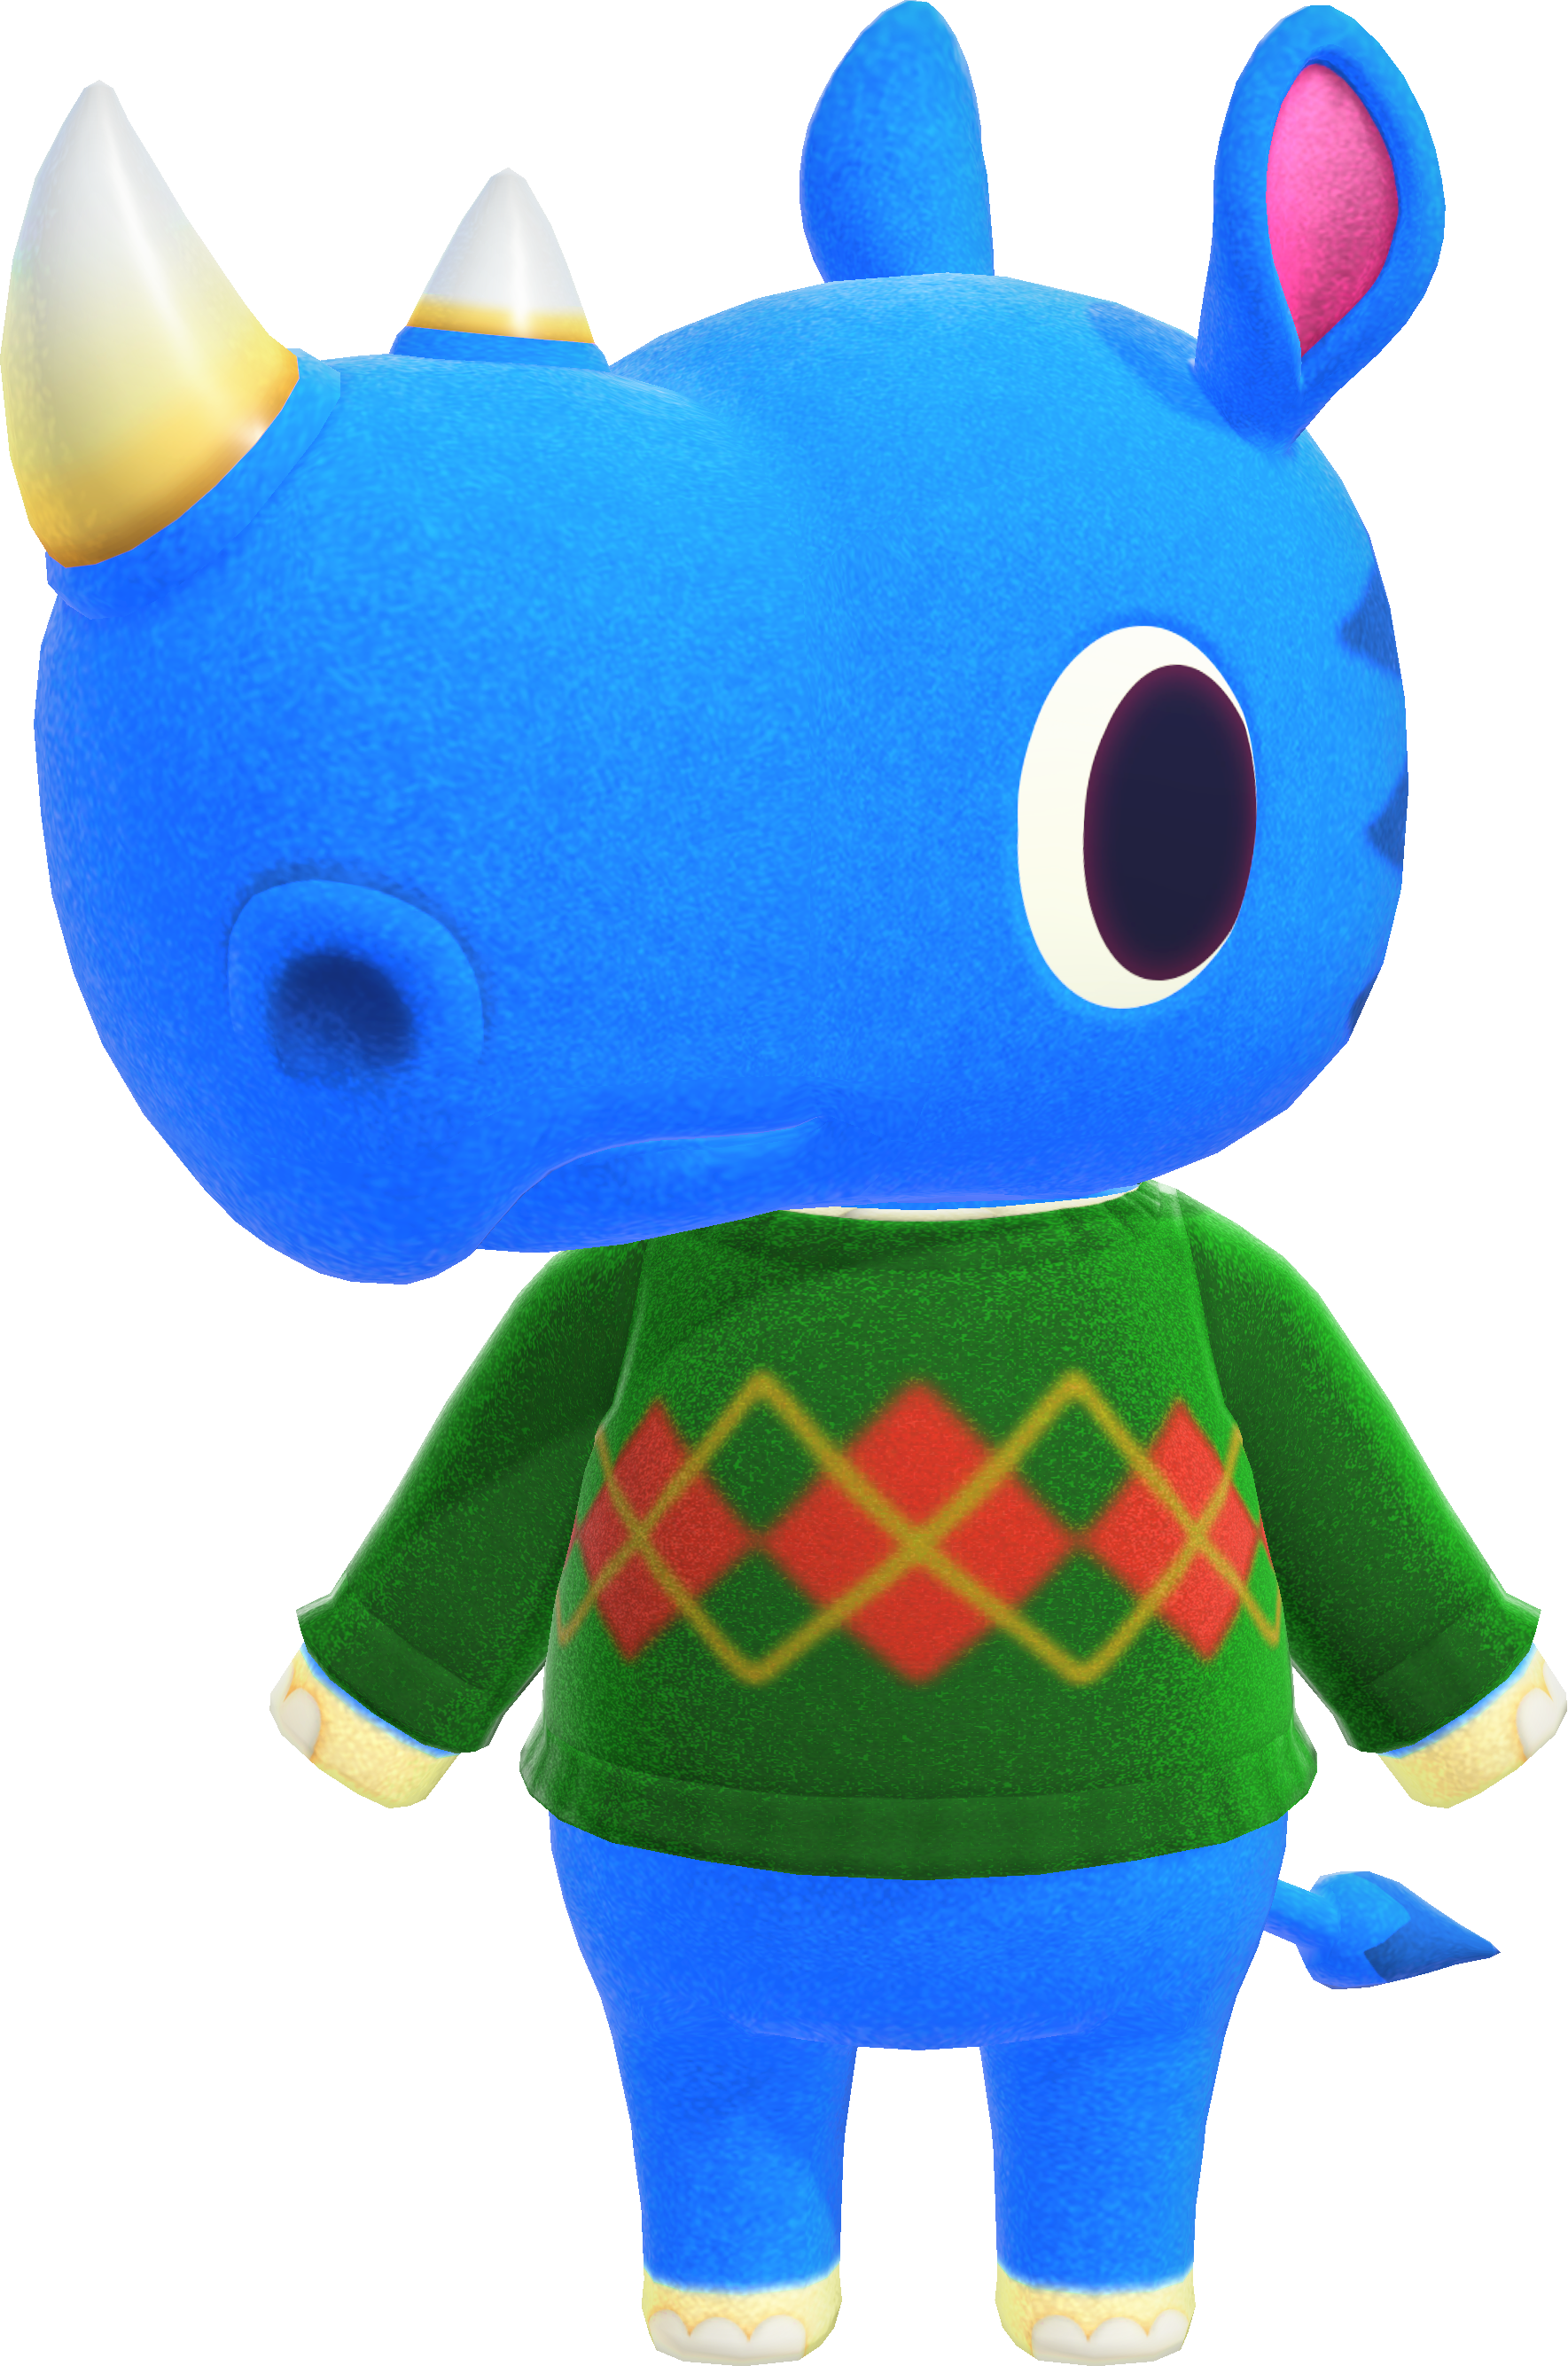 Hornsby - Animal Crossing Wiki - Nookipedia